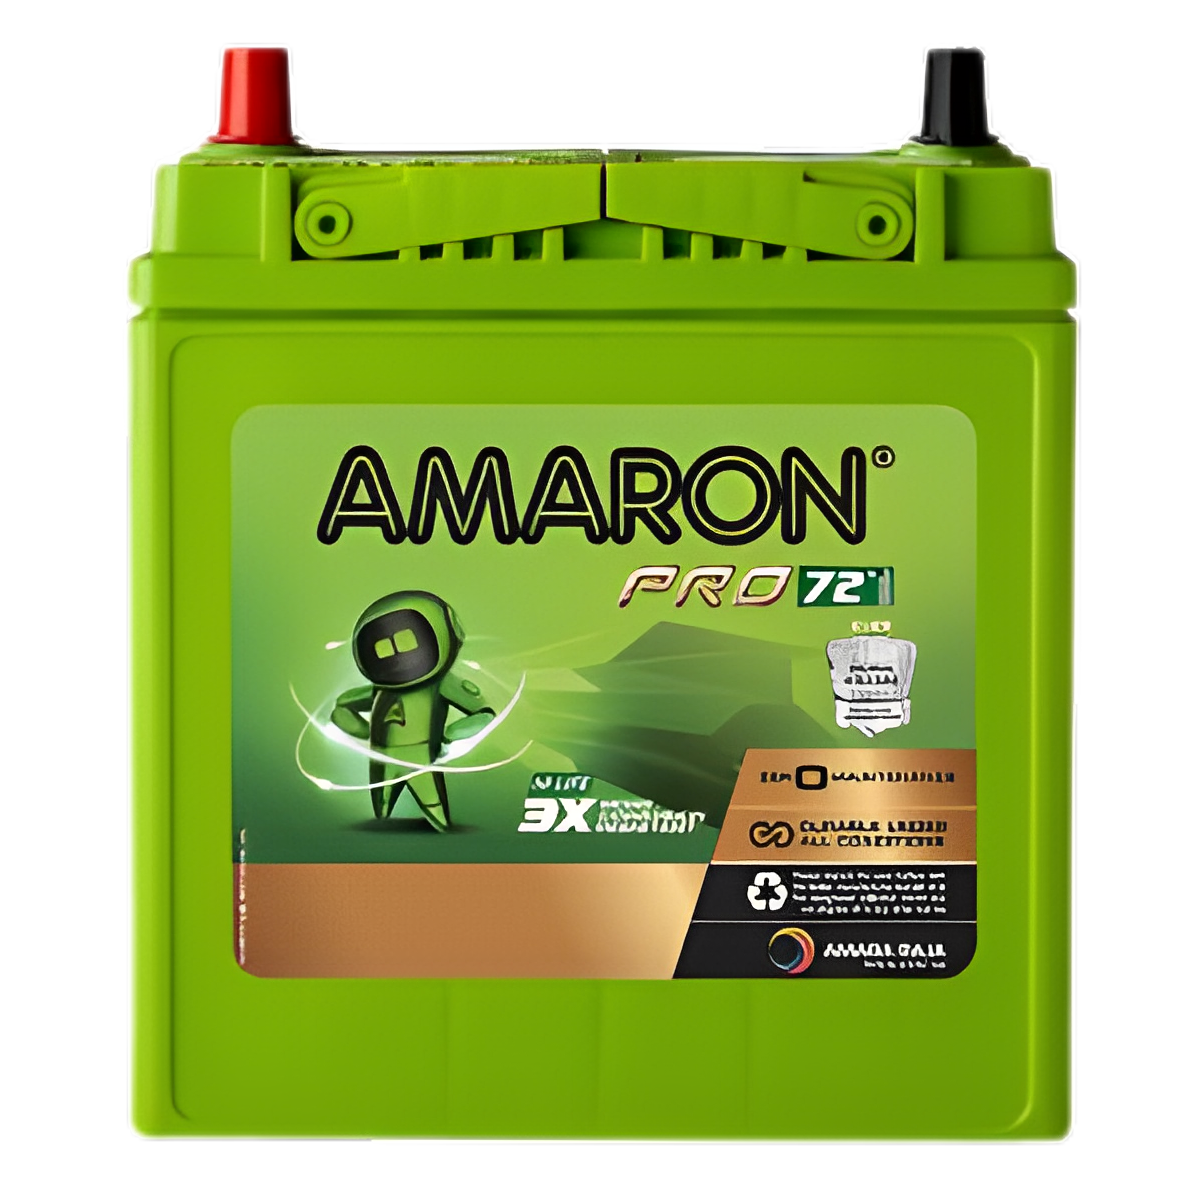 Amaronofficial on LinkedIn: #amaronhilife #vehicle #lubricant #gearoil  #engineoil #productlaunch | 37 comments